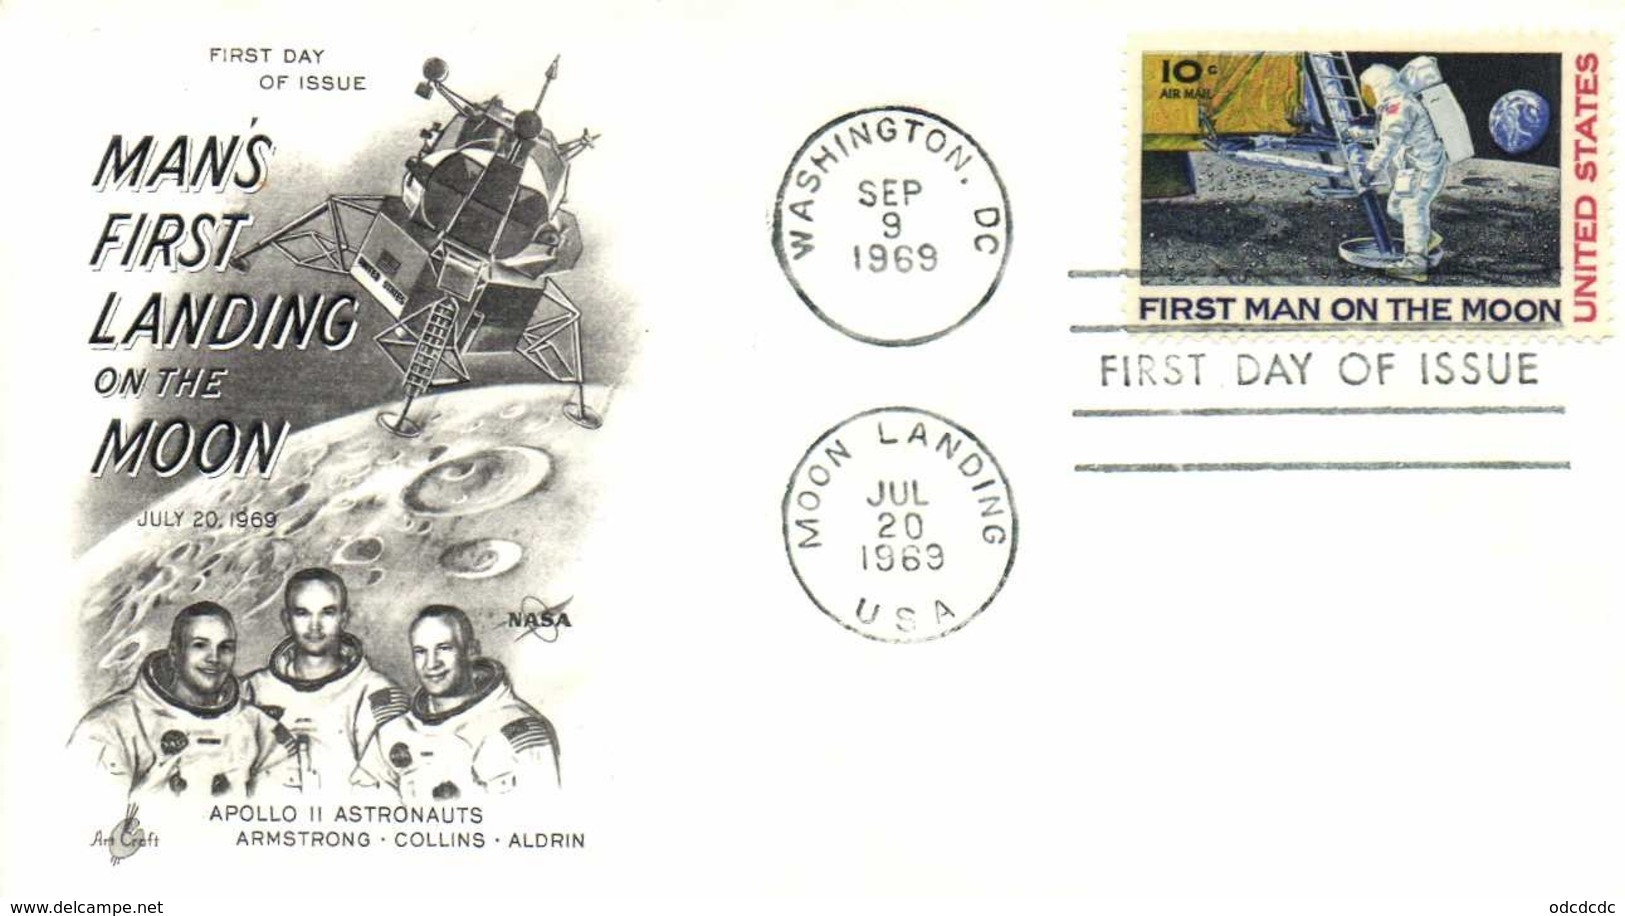 FIRST DAY  OF ISSUE  MANS  FIRST LANDING On The MOON Amstrong Collins Aldrin  MOON LANDING Jul 20 1969 U.S.A. 10Cents RV - 1961-1970